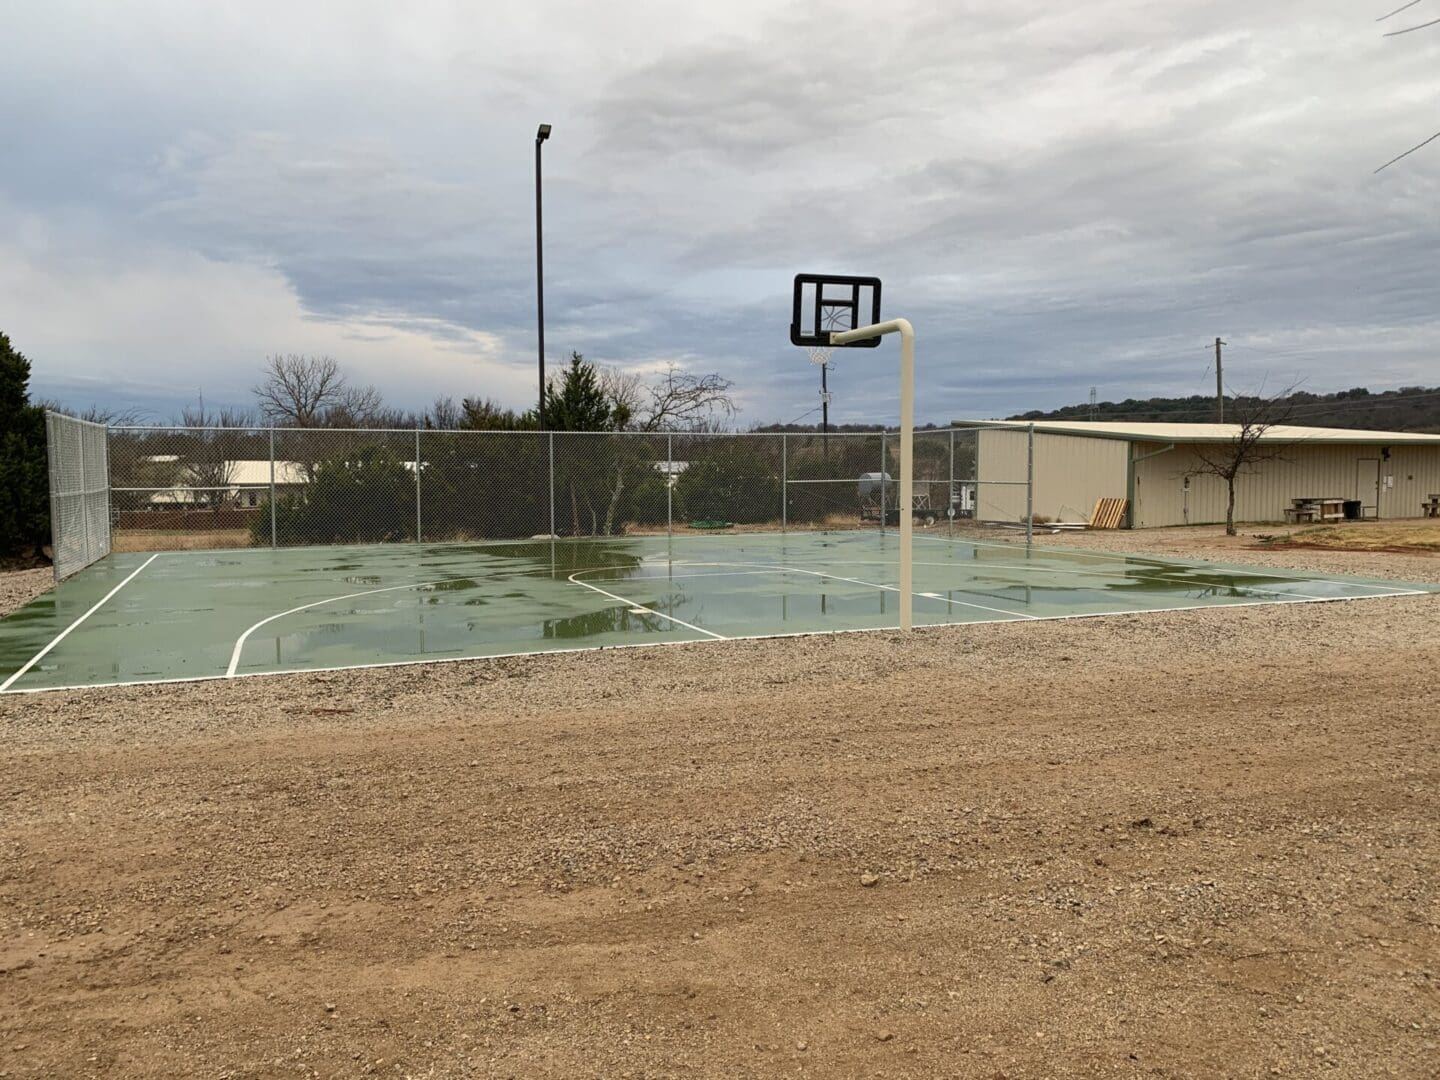 A view of the basket ball court with focus light